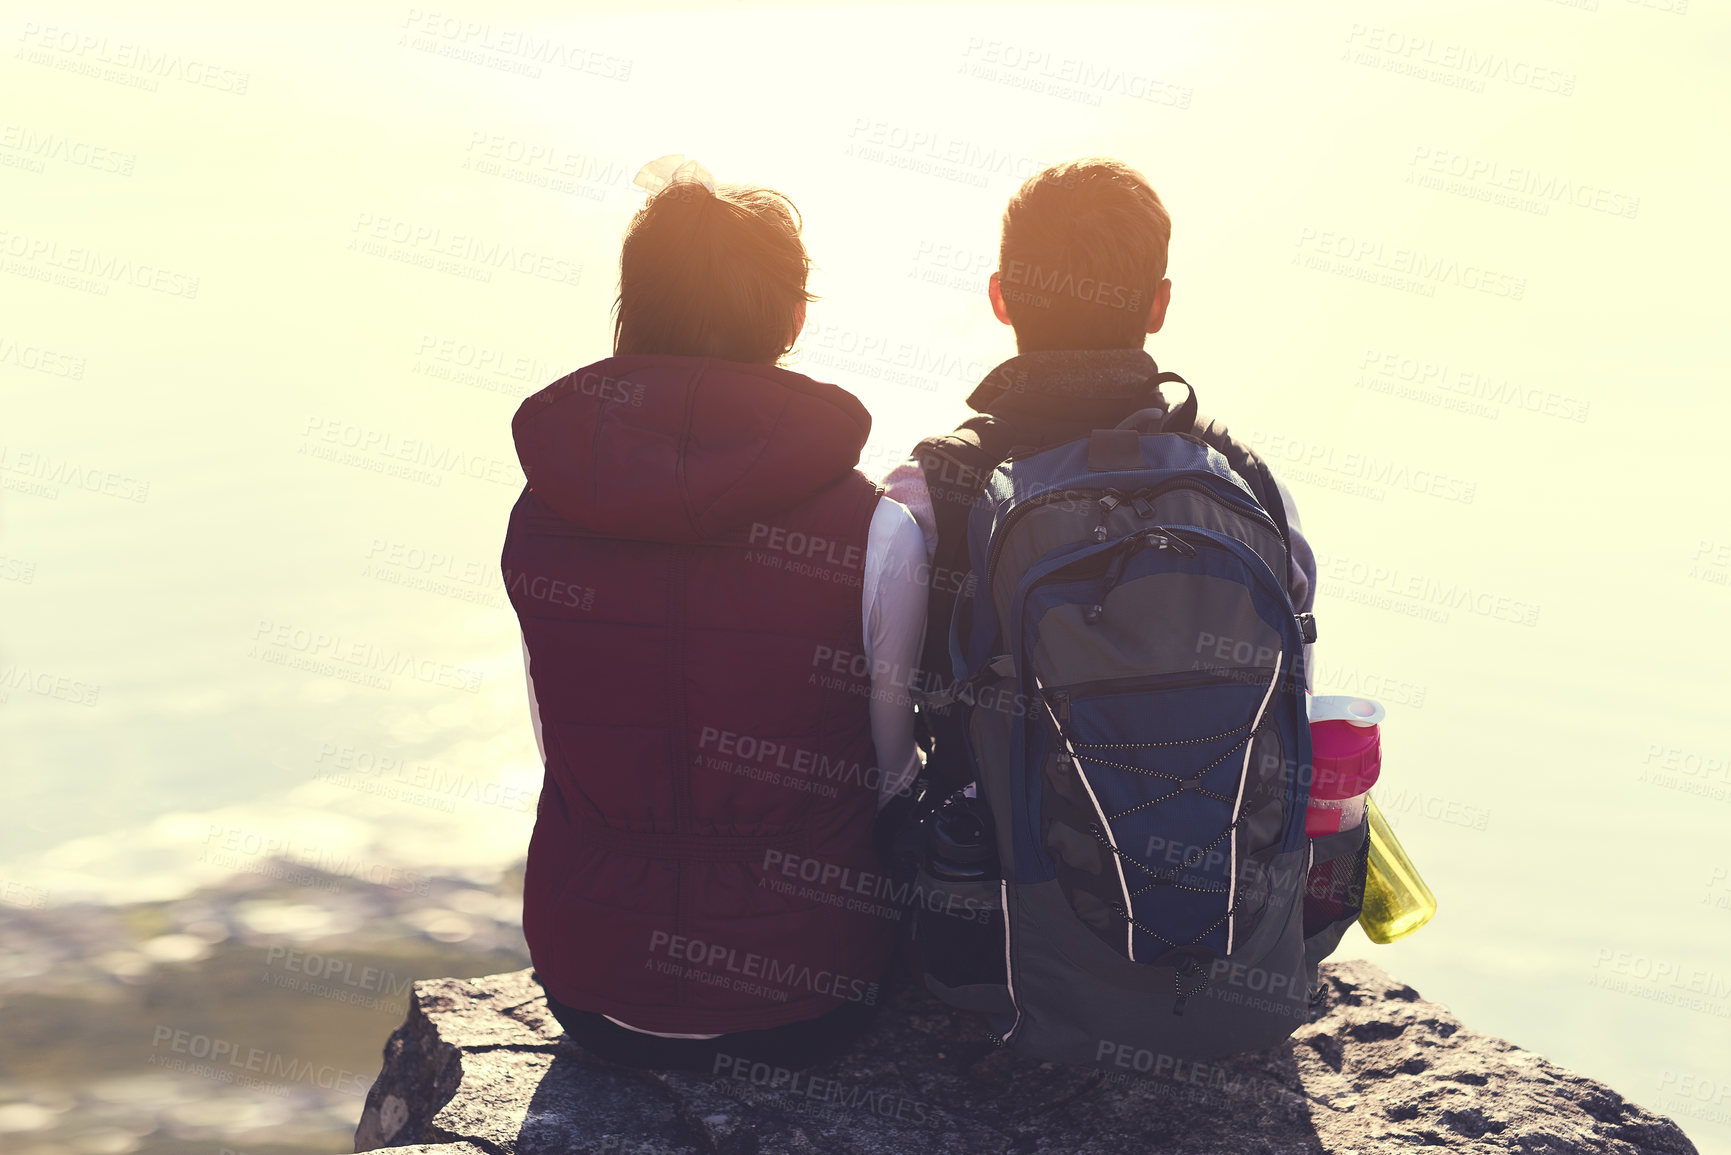 Buy stock photo Rearview shot of a young couple admiring the view from the top of a mountain